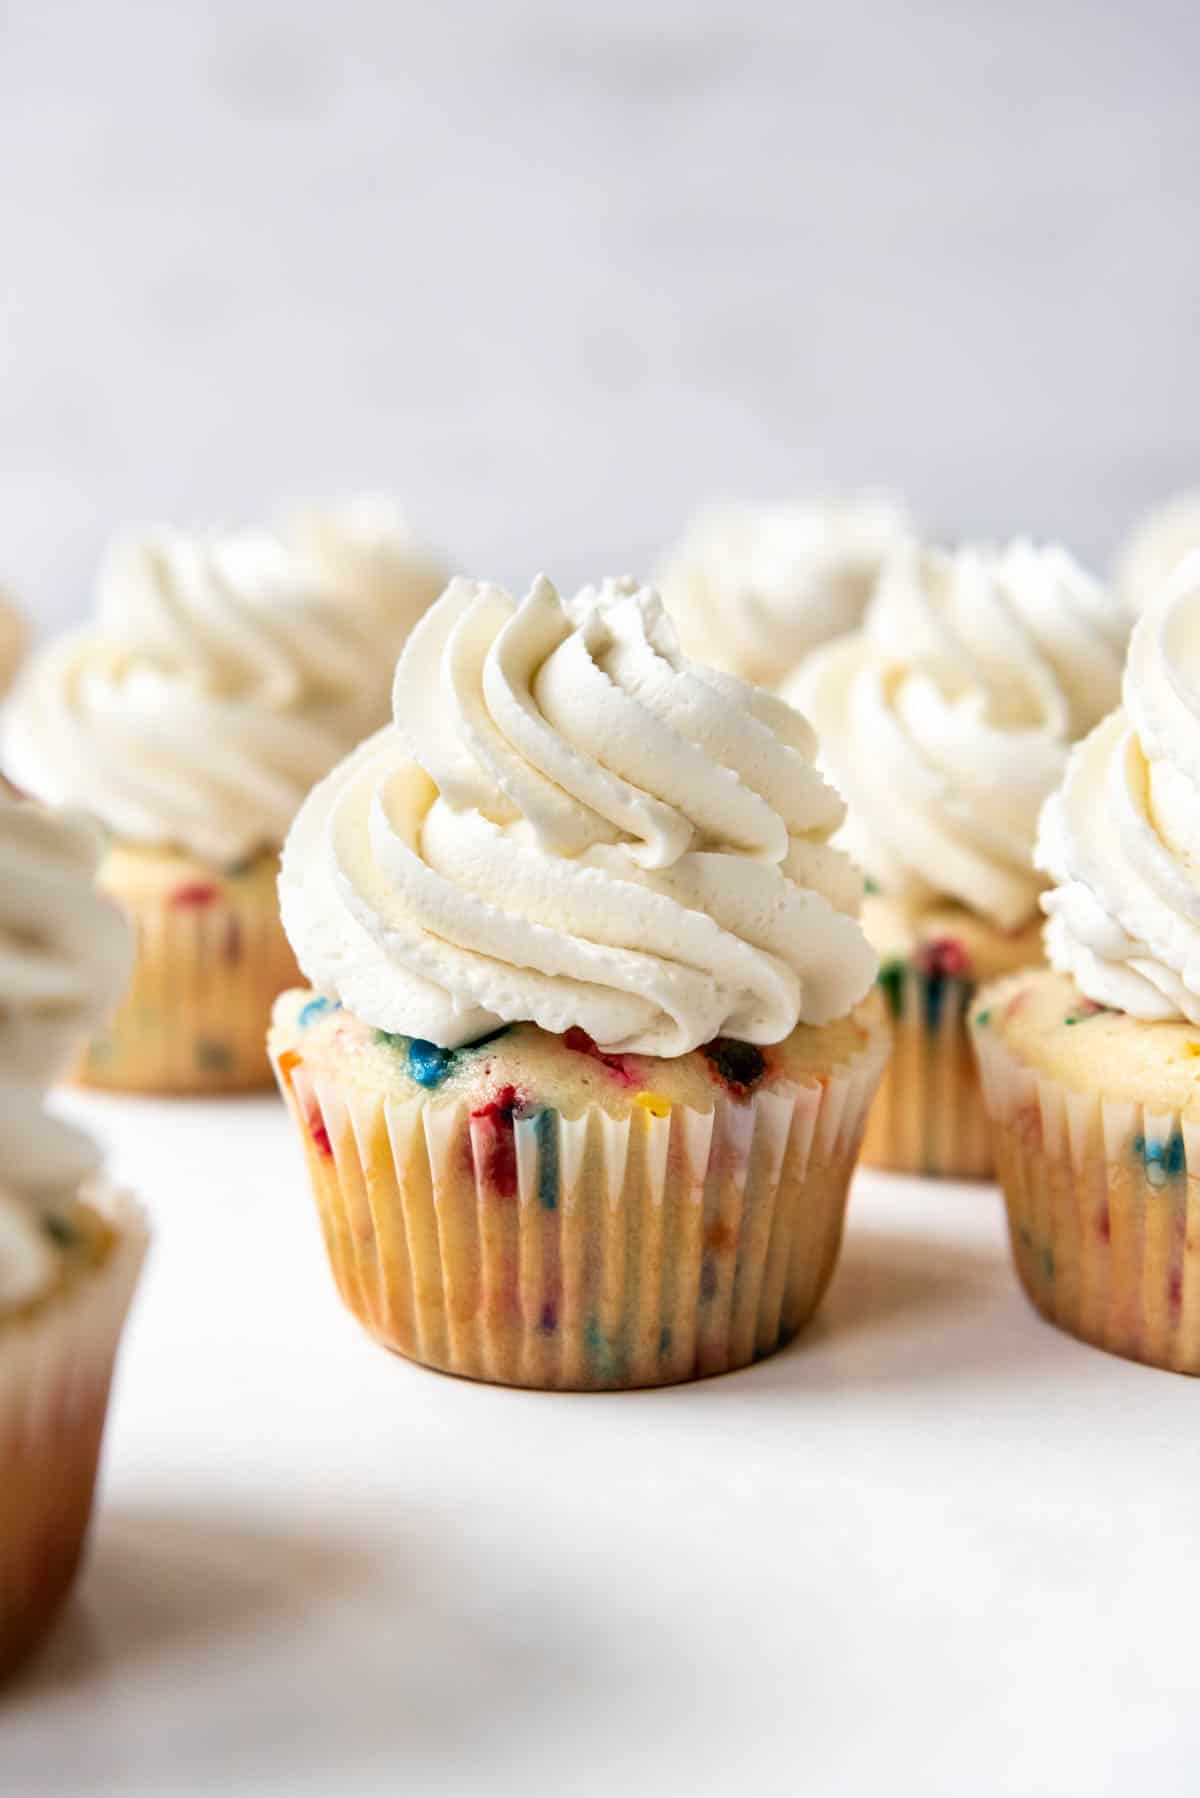 Cupcakes topped with swirls of Swiss meringue buttercream frosting.